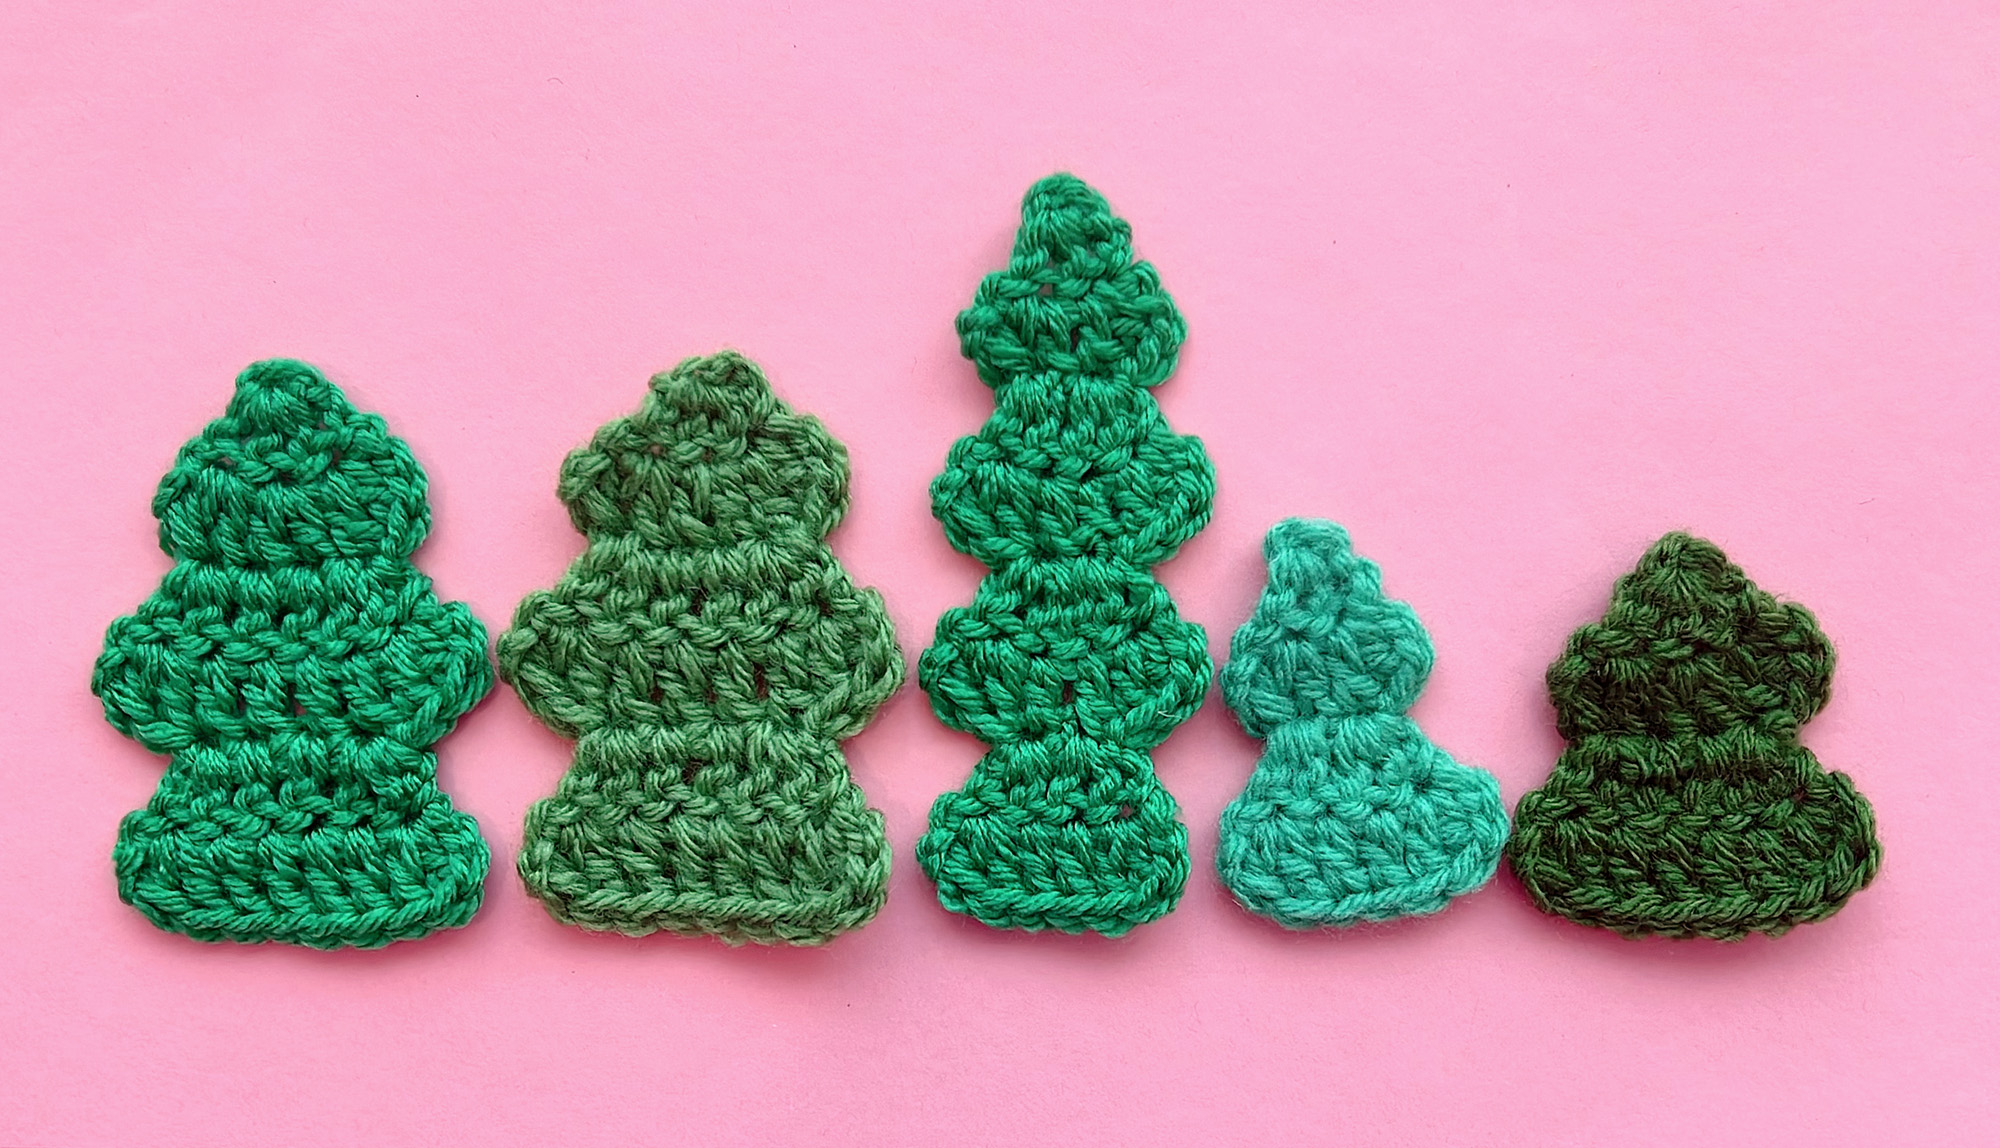 5 small crocheted Christmas tree appliqués in a horizontal row in various shades of green and different heights on a pink background